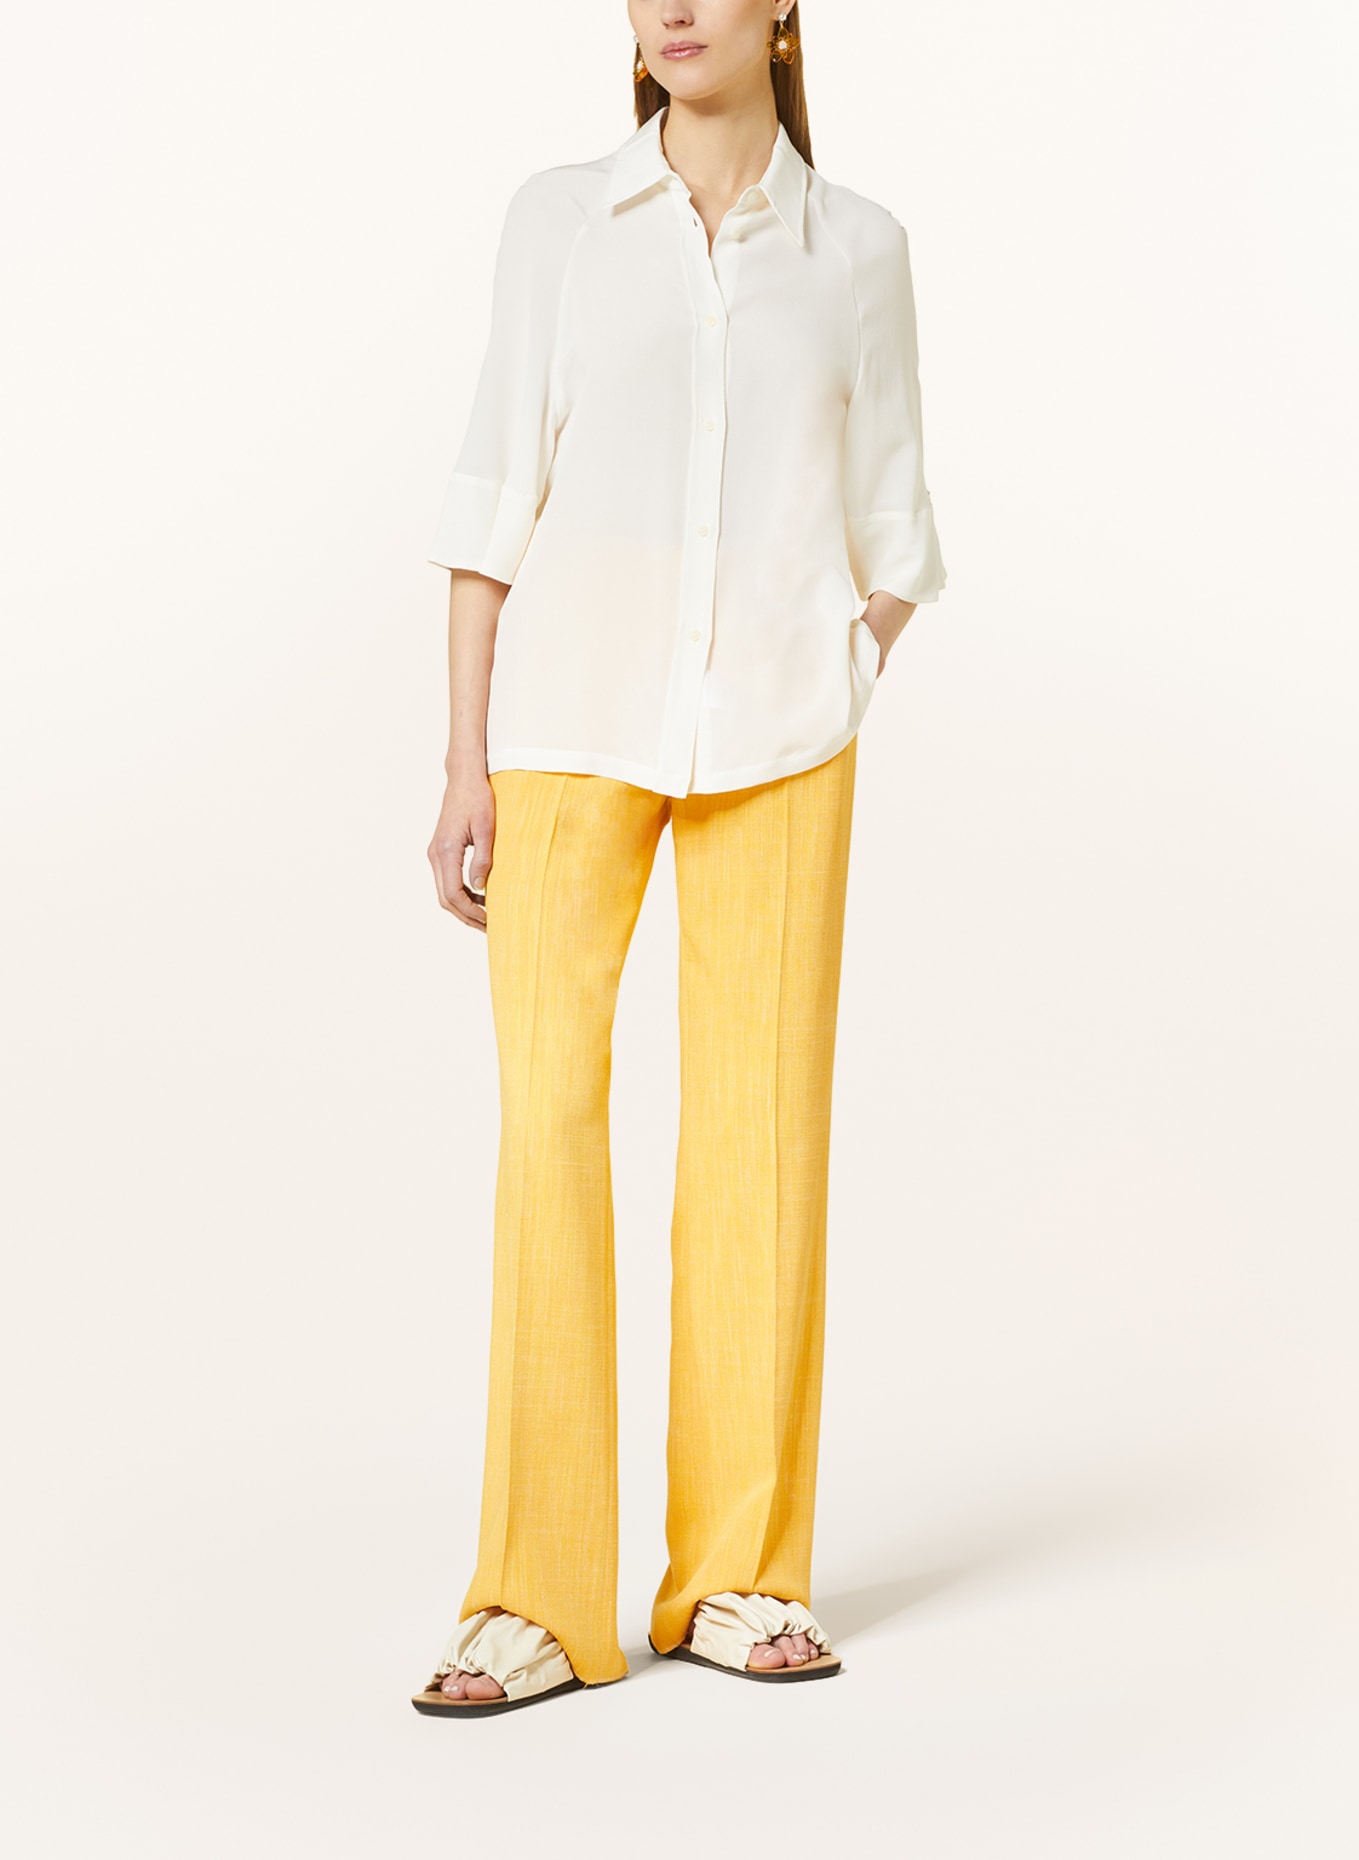 ETRO Shirt blouse made of silk with 3/4 sleeves, Color: WHITE (Image 2)